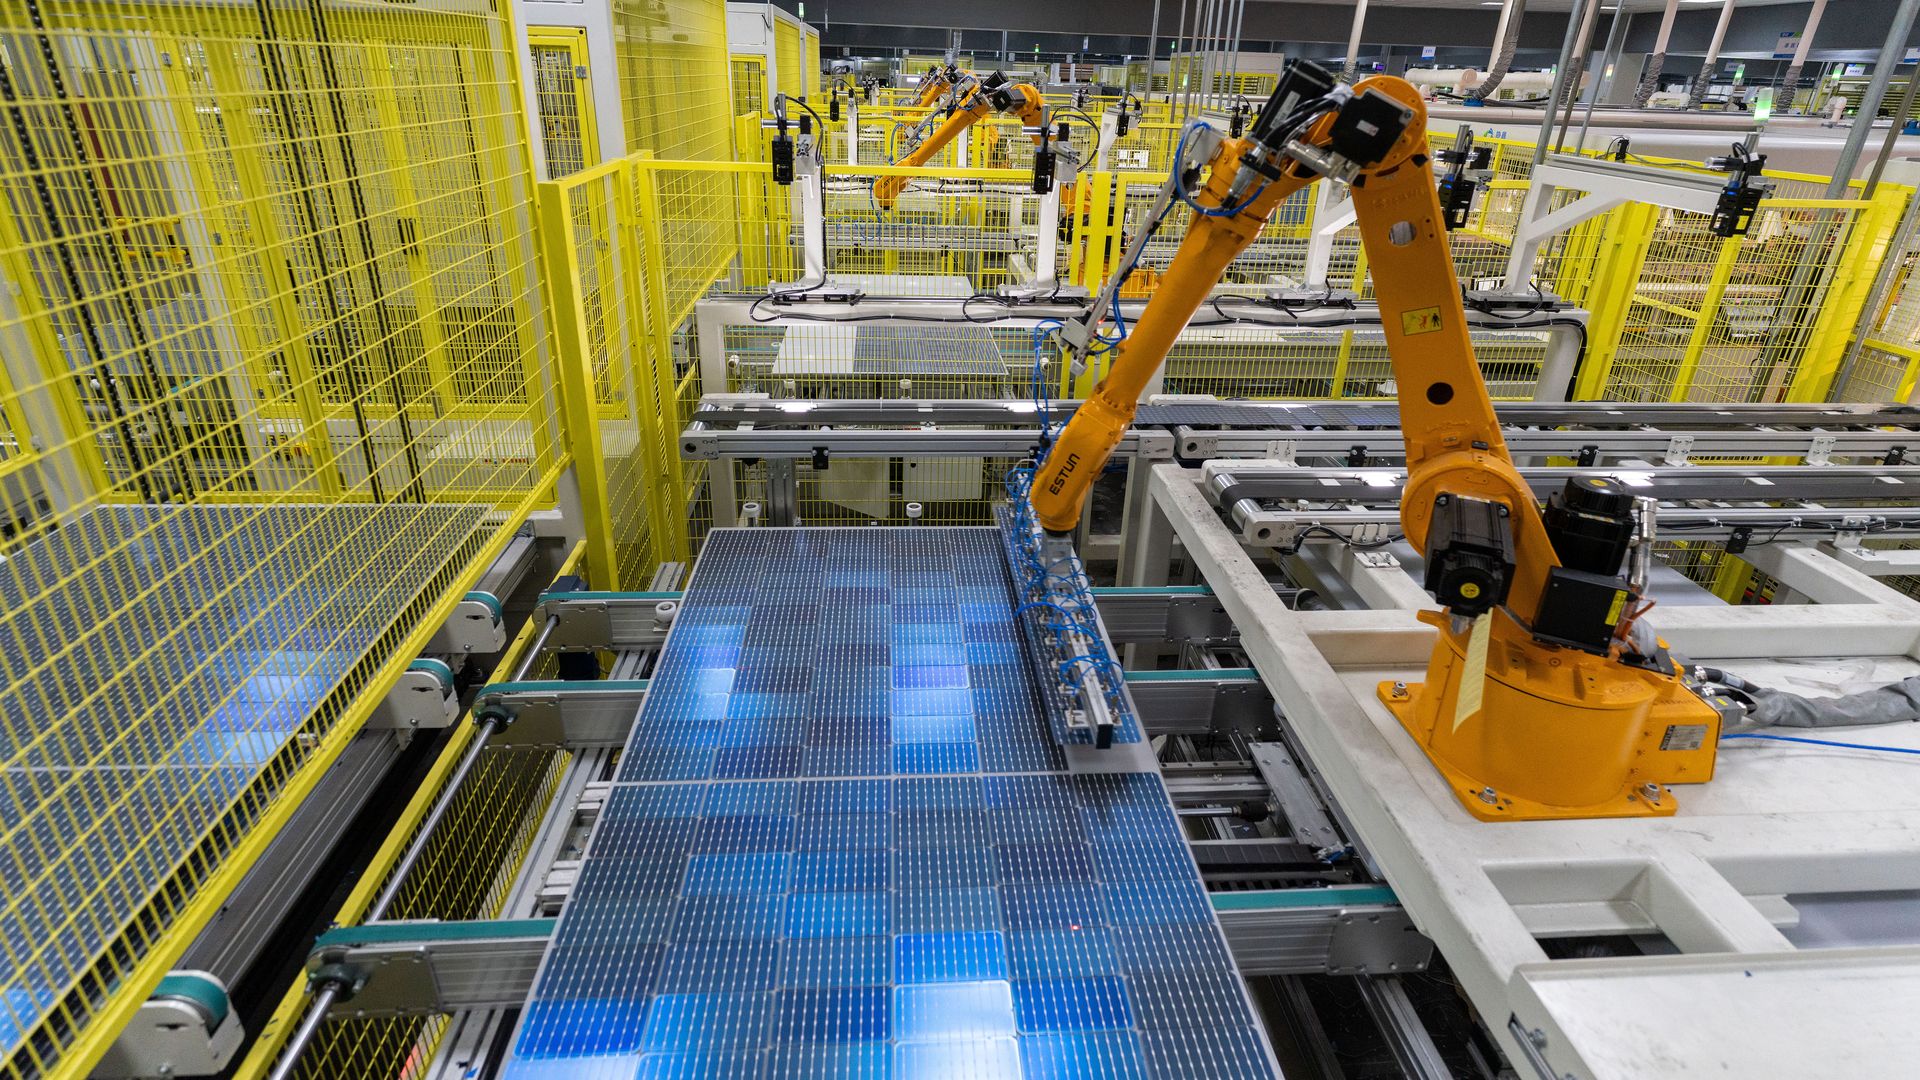  Robotic arms work on the production line of solar panels at a factory of GCL System Integration Technology Co. Ltd on September 15, 2022 in Feidong County, Hefei City, Anhui Province of China. 